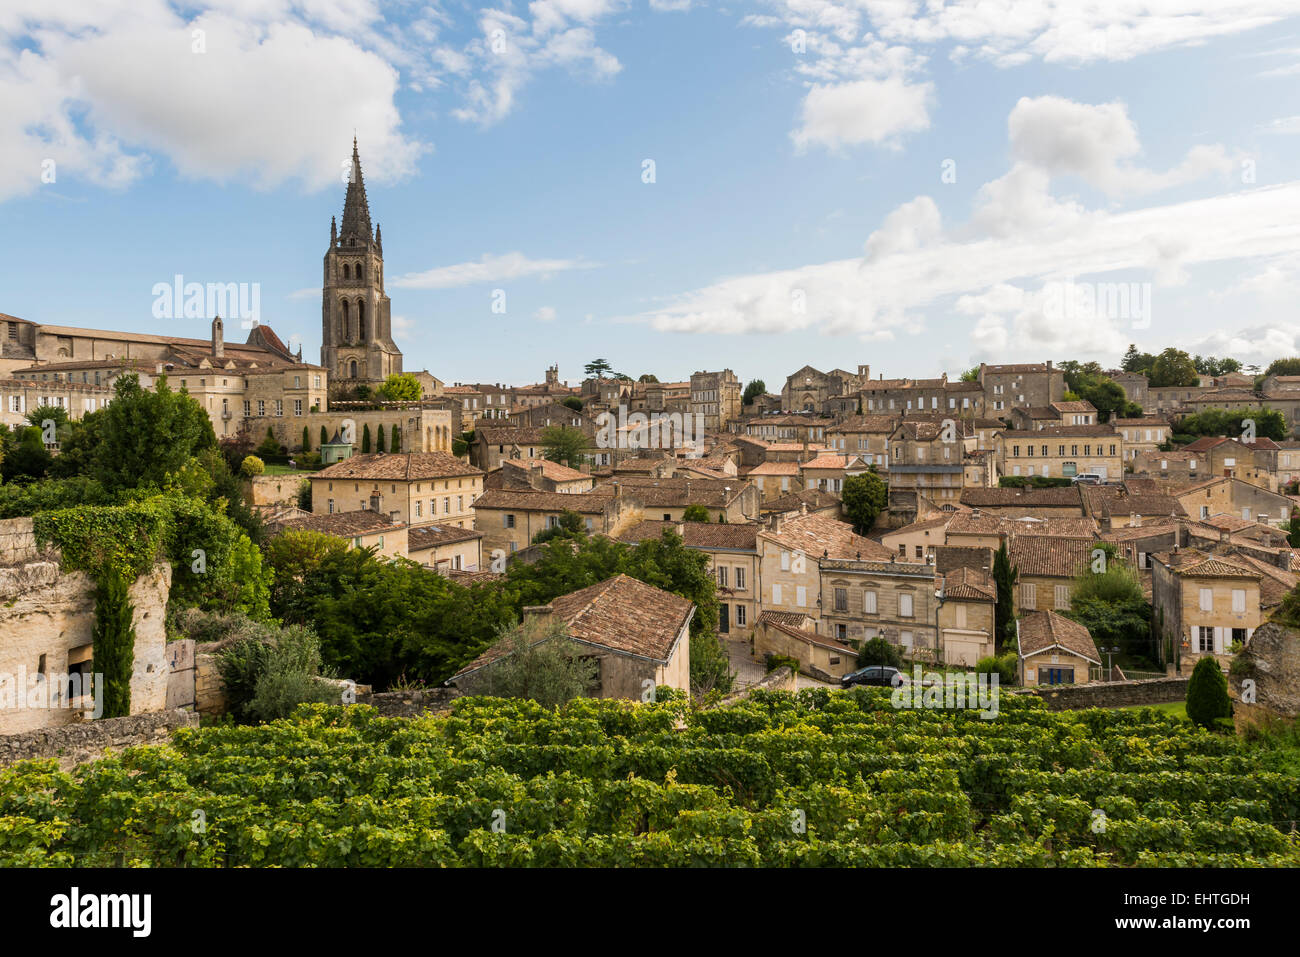 View on UNESCO World Heritage site Saint-Emilion with old houses, church and famous winedistrict at night. Stock Photo